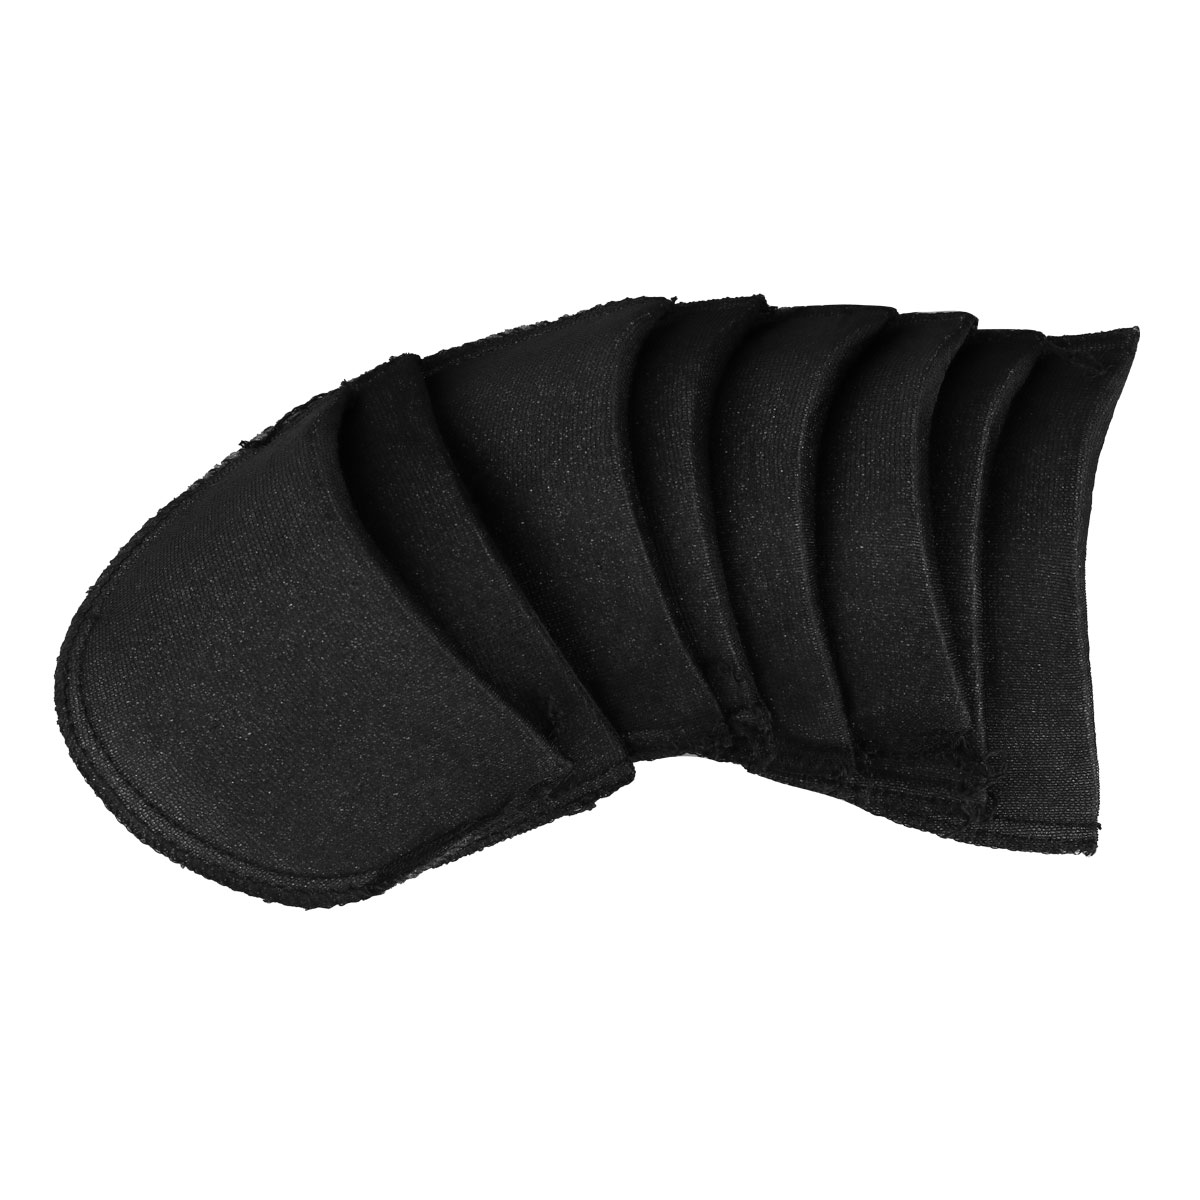 US STOCK 4 Pairs Soft Padded Shoulder Padding Non-slip Foam Shoulder Pads Enhancer for Blazer T-shirt Clothes Sewing Accessories